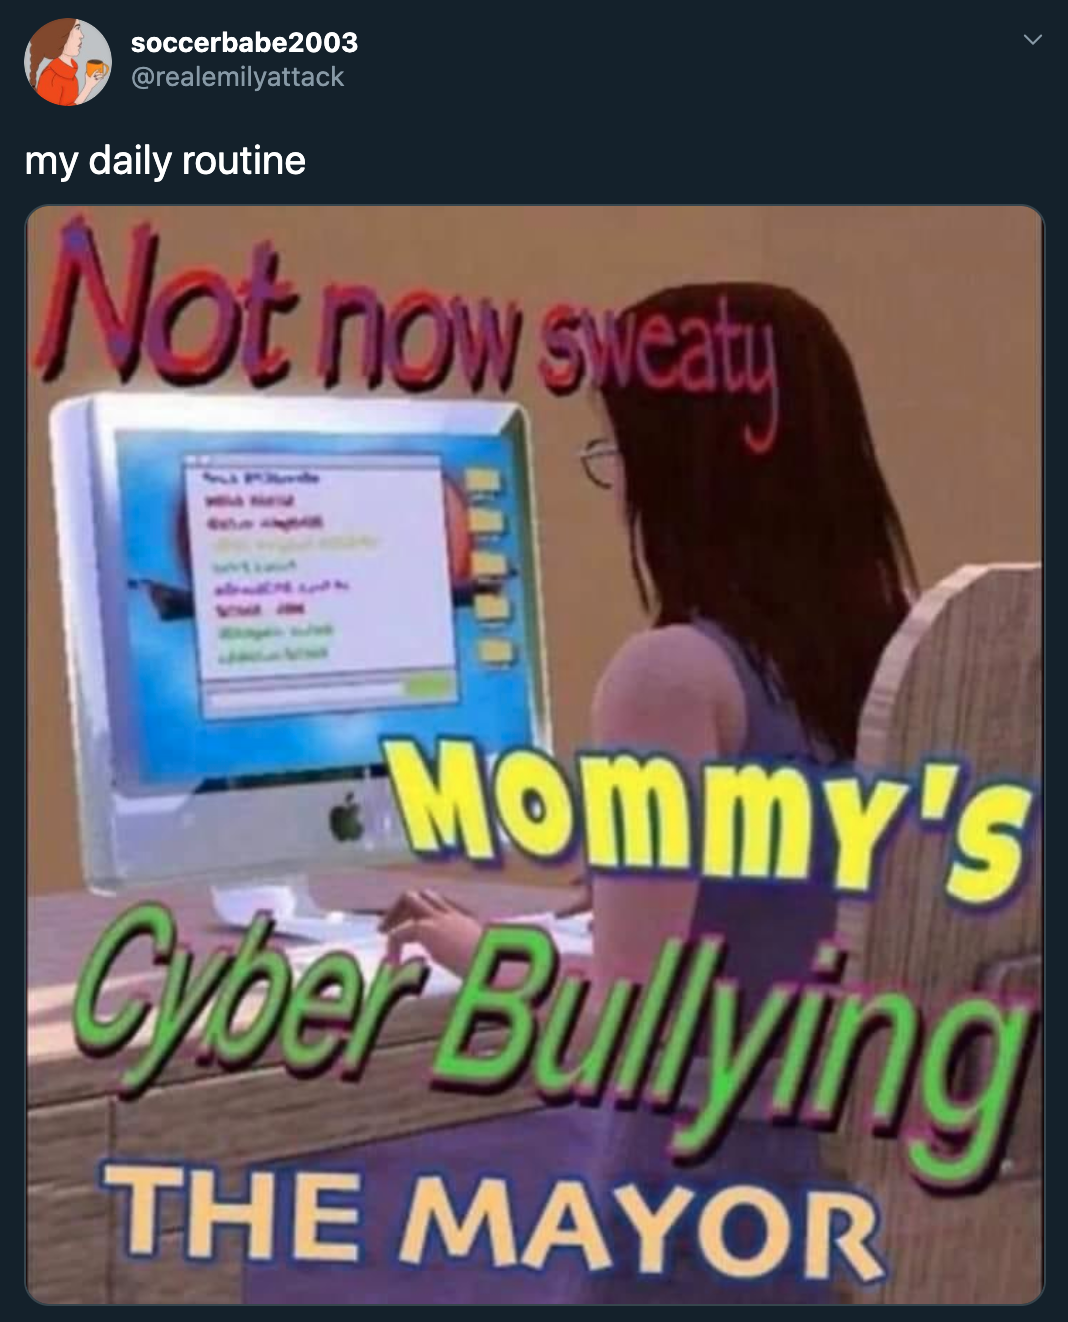 my daily routine - Not now sweaty Mommy's Cyber Bullying The Mayor